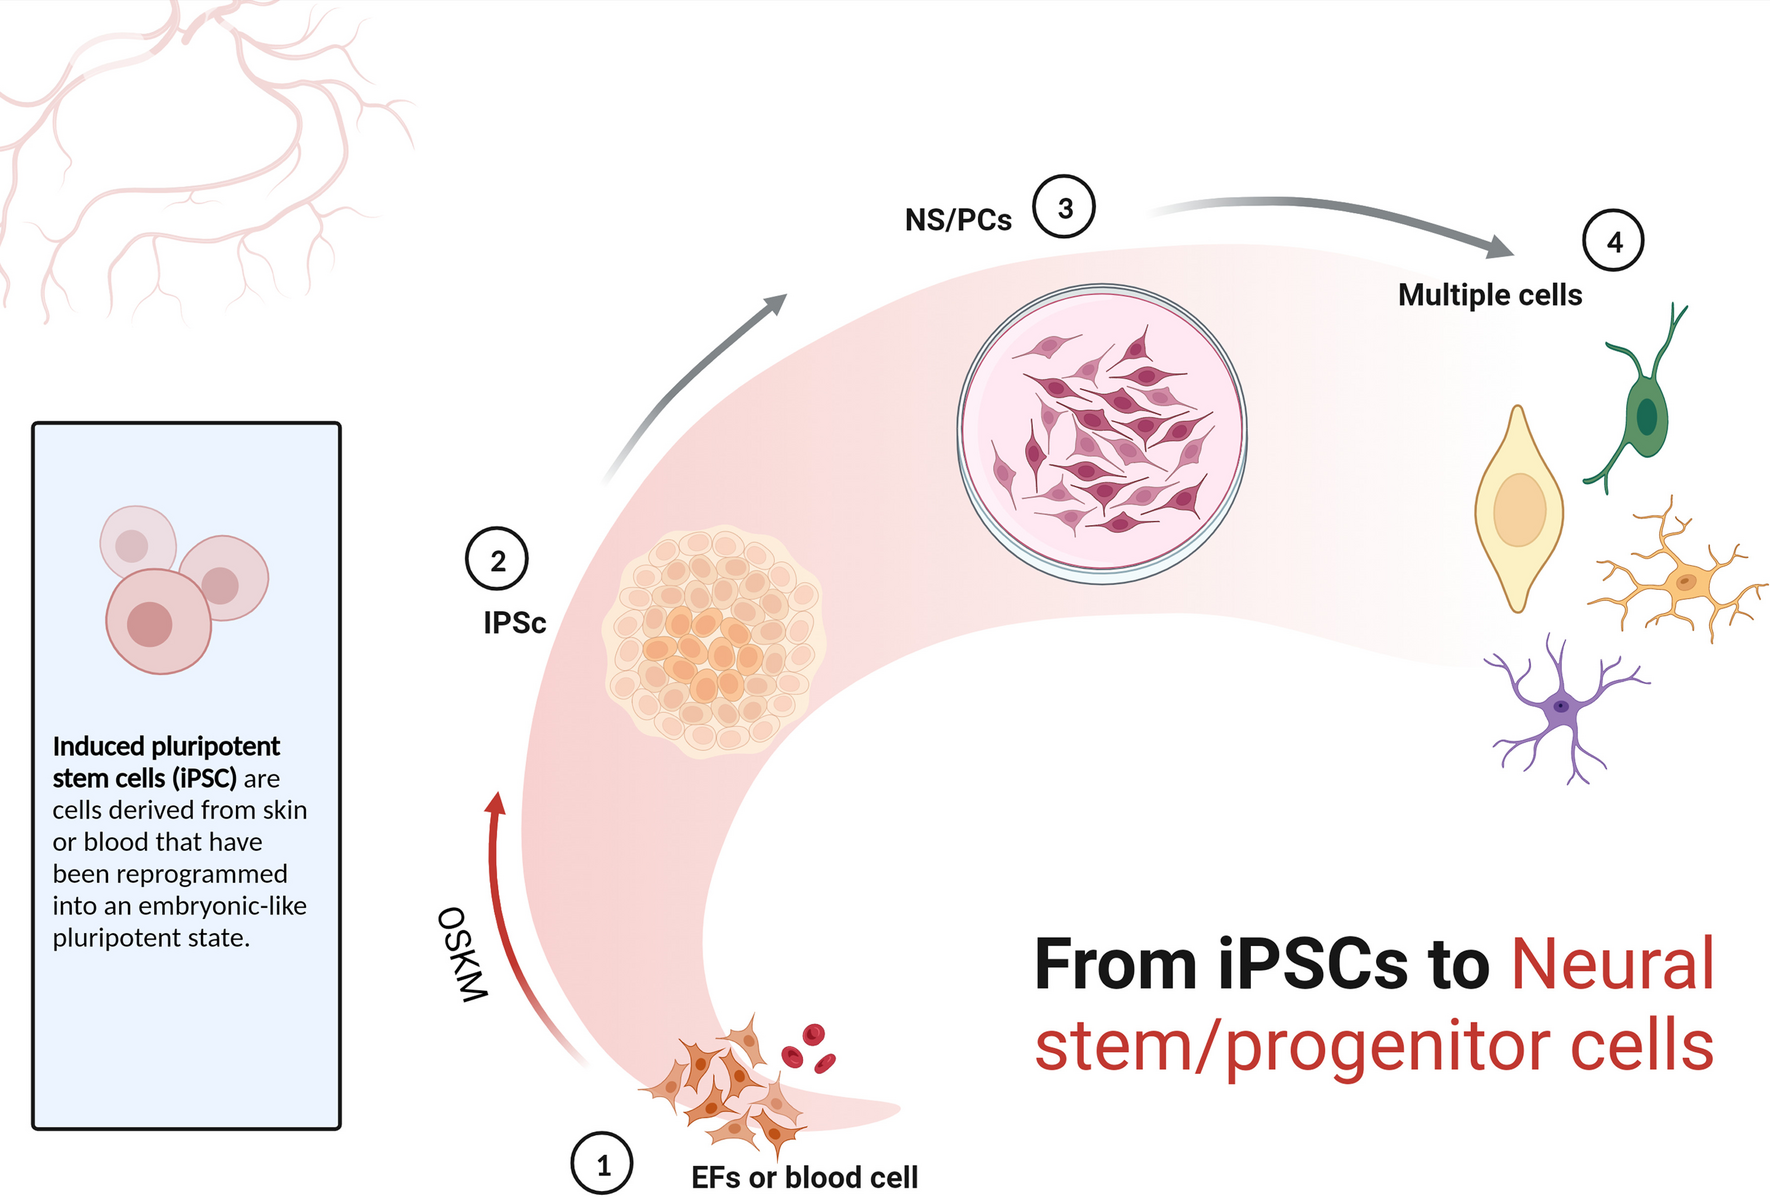 Epigenetic regulation and factors that influence the effect of iPSCs-derived neural stem/progenitor cells (NS/PCs) in the treatment of spinal cord injury